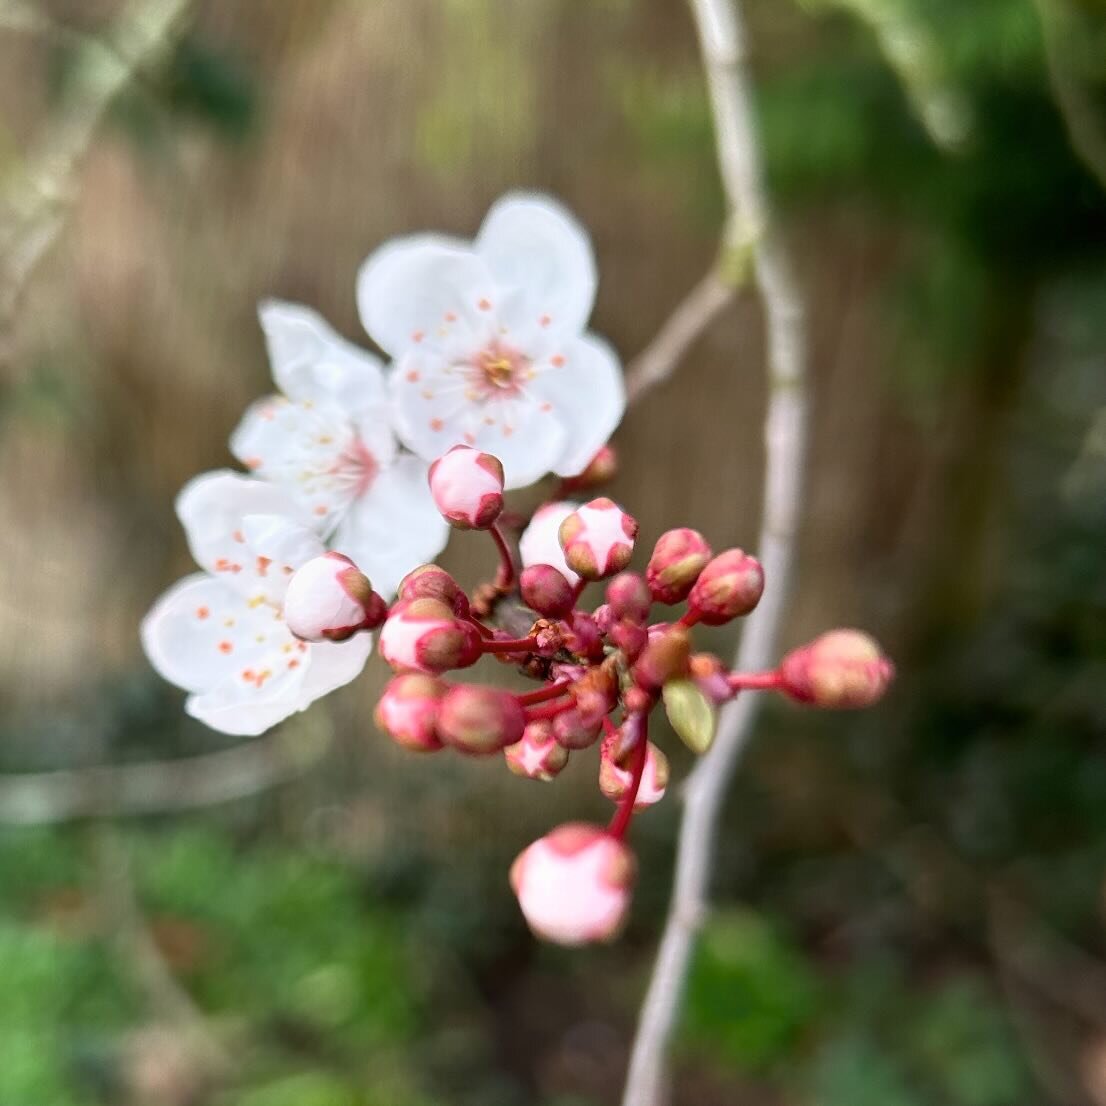 Well hello blossom 🌸 so good to see you and the sun, let&rsquo;s pretend for a little while that this is spring proper, rather than nature teasing us with fool&rsquo;s spring. #blossom #foolsspring #springiscoming